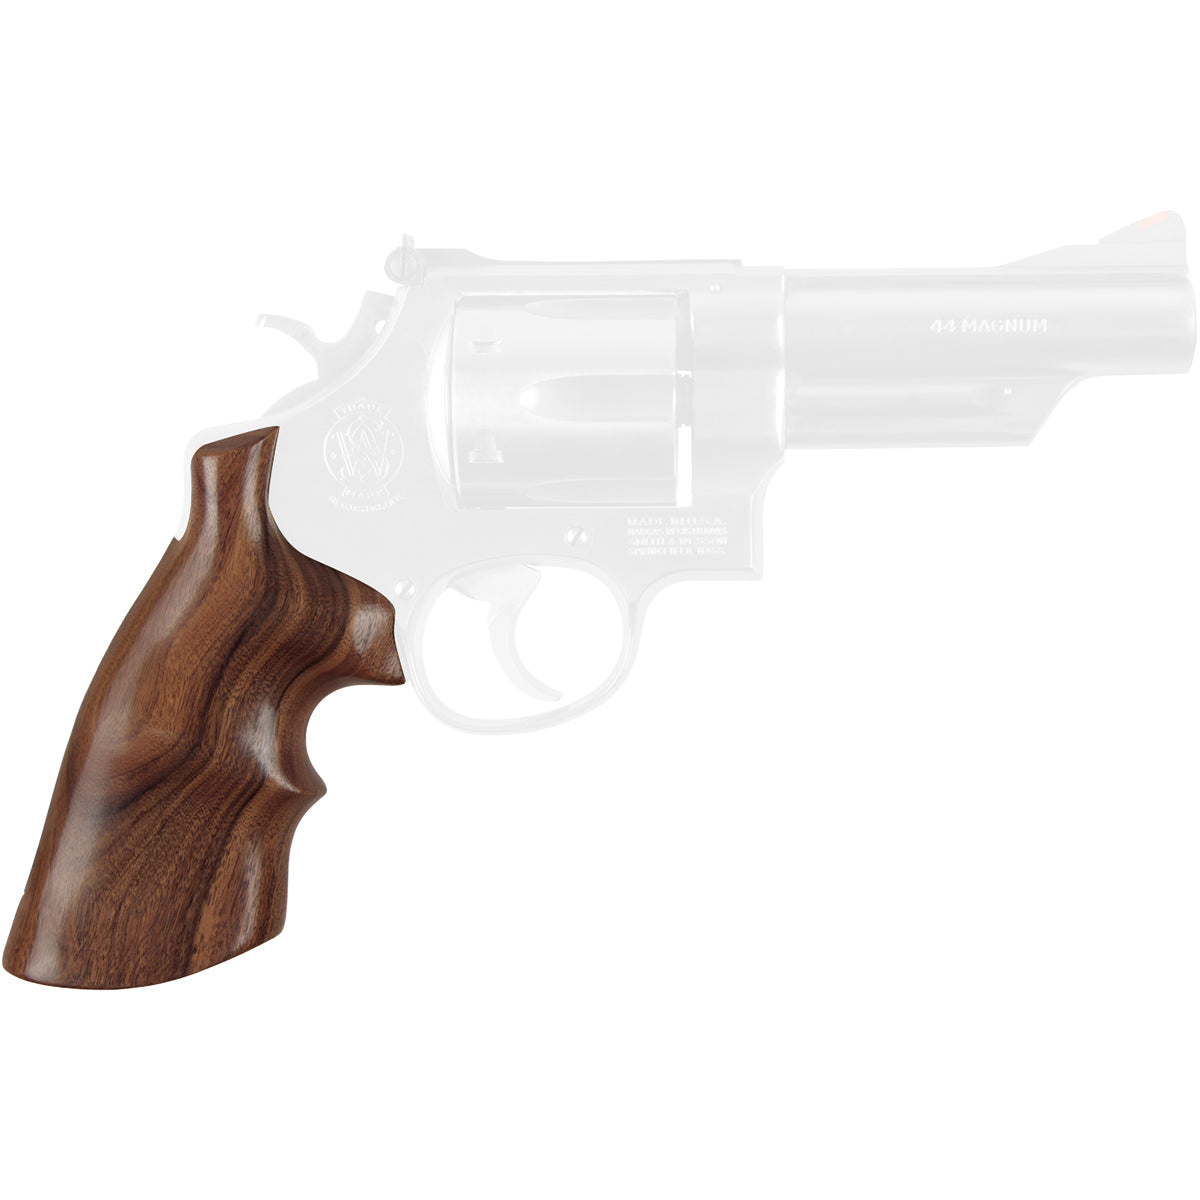 Hogue Smith & Wesson Square Butt Smooth N Frame with Finger Grooves - Pau Ferro Hogue